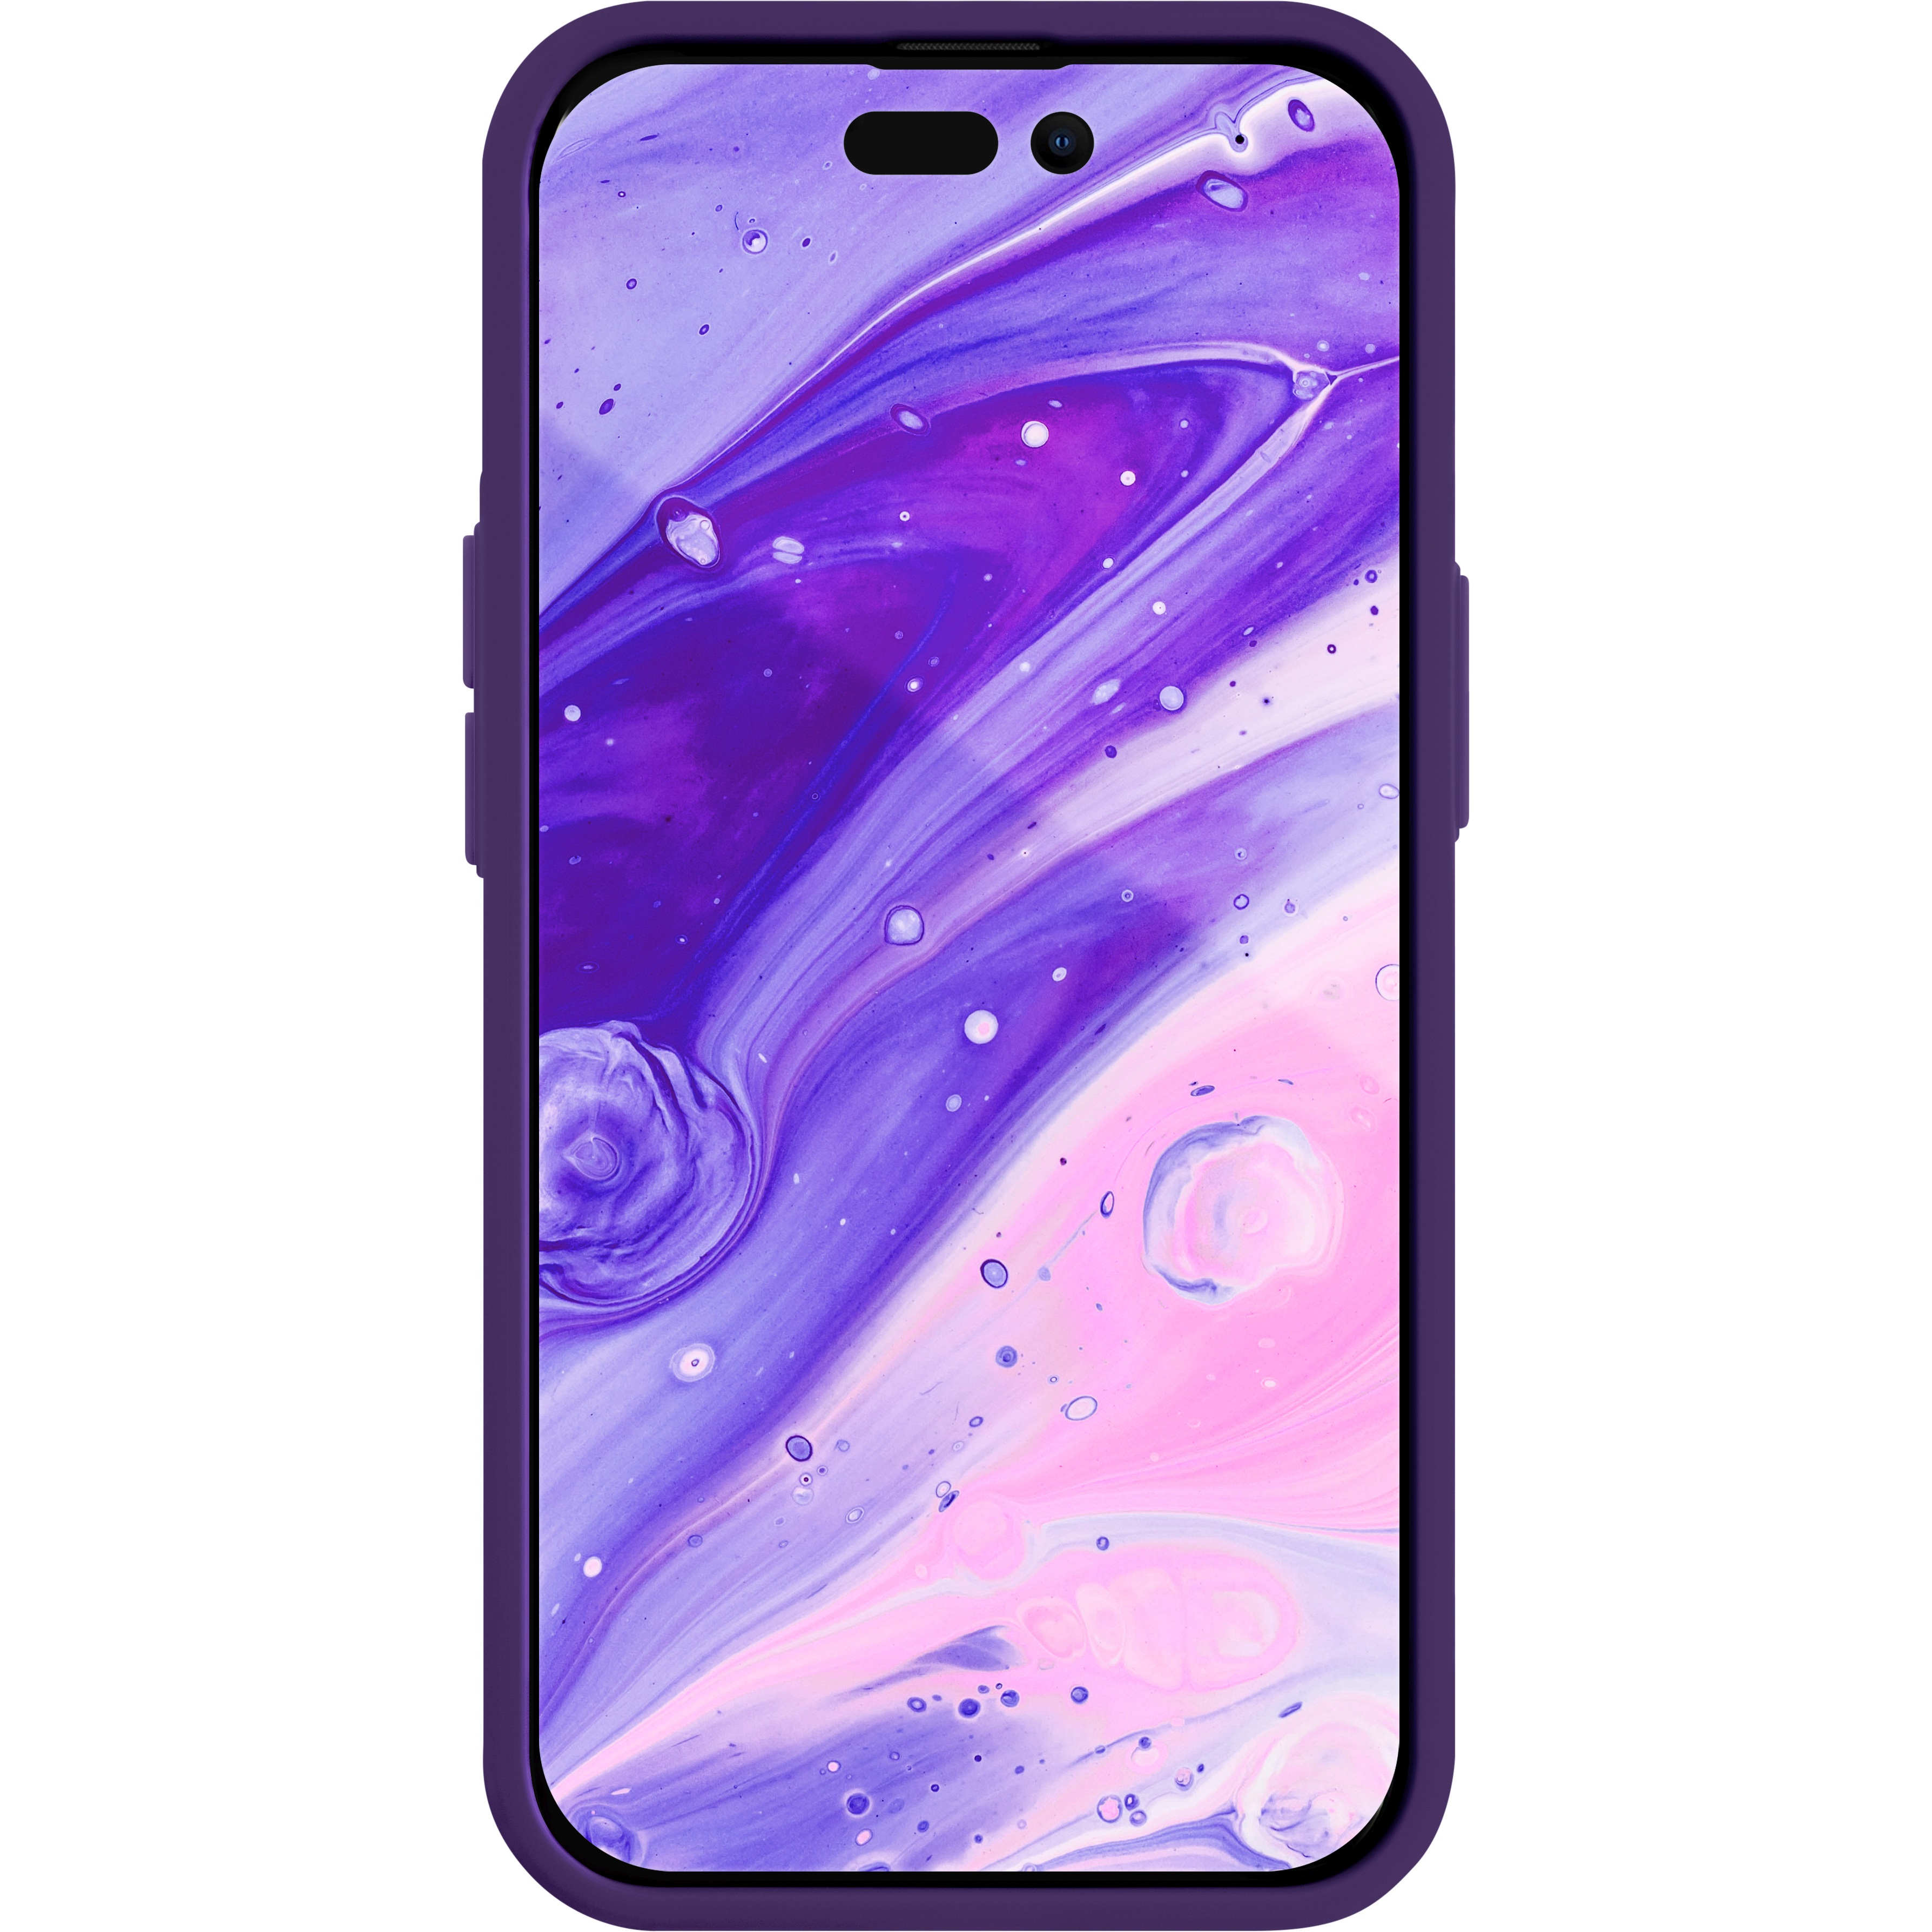 APPLE, 14 IPHONE Backcover, LAUT MAX, Protect, Huex PURPLE PRO